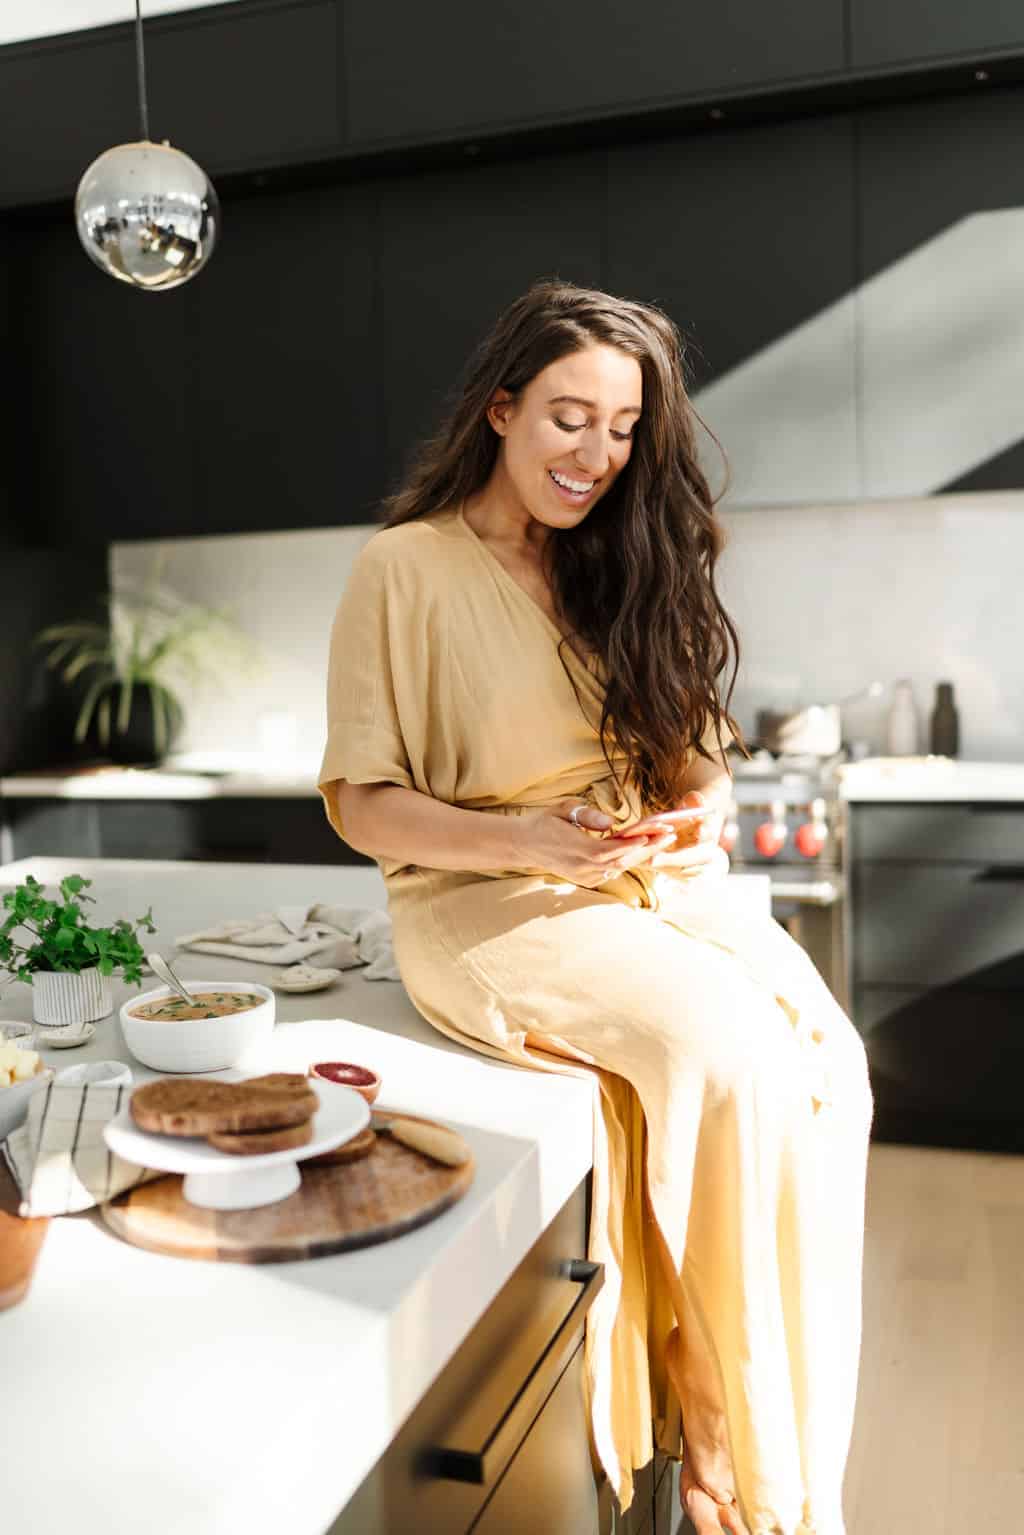 Maria sitting on countertop in kitchen with phone in her hand showing aspiring food bloggers what mistakes they shouldn't be making